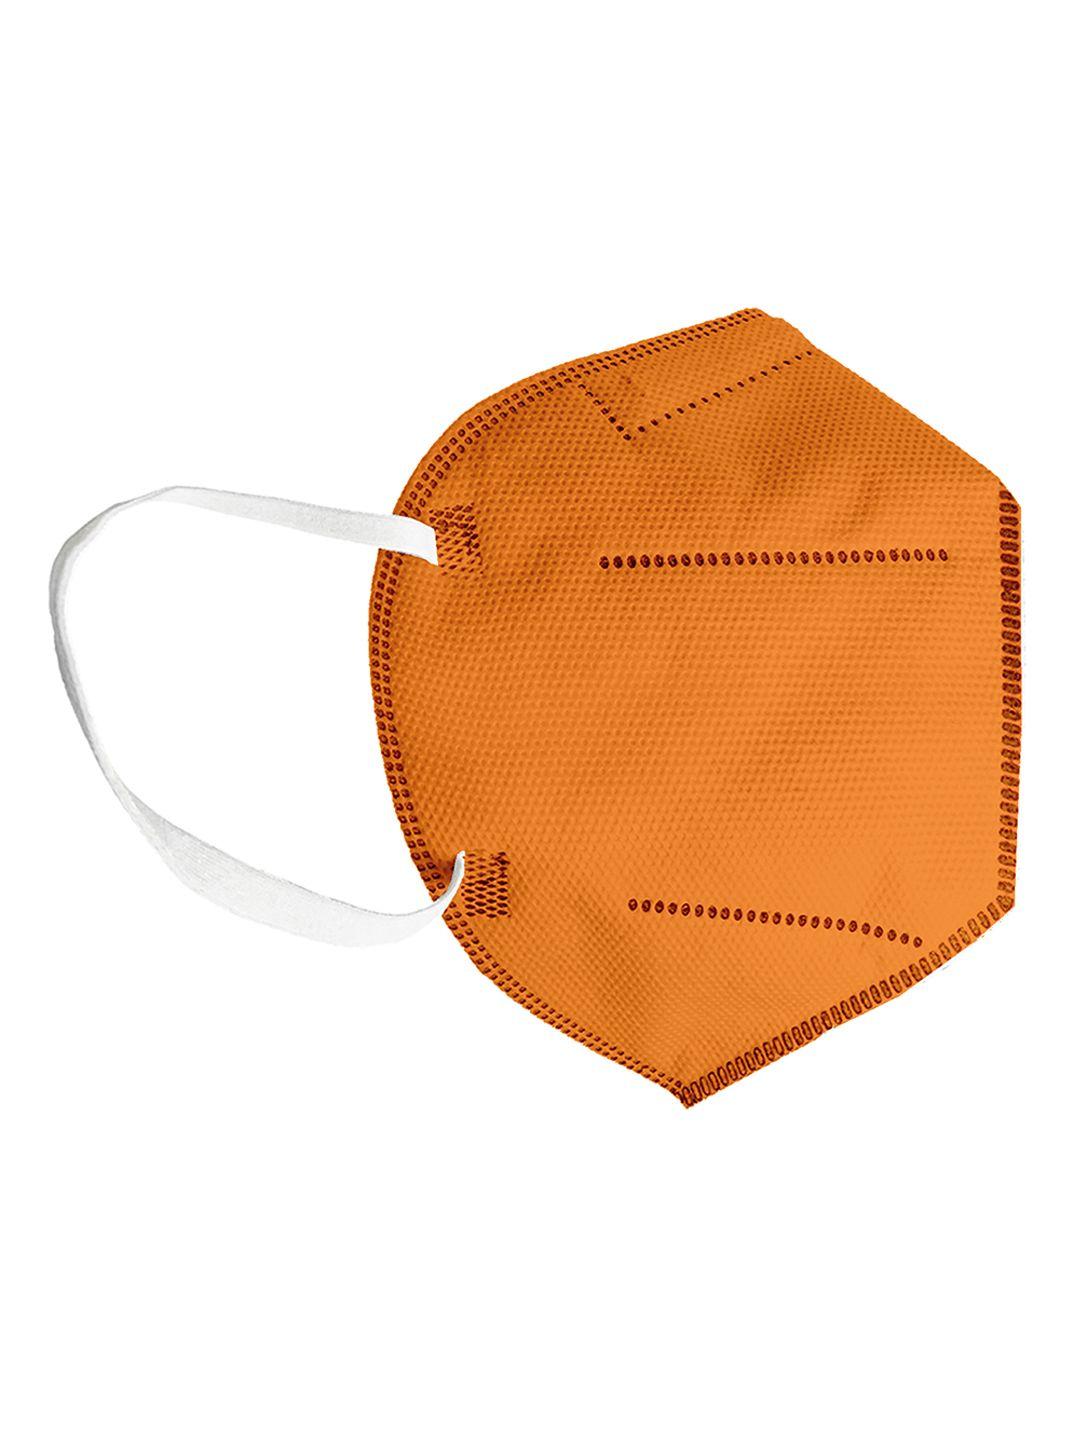 status unisex mustard yellow solid reusable 4-ply protective outdoor n95 mask